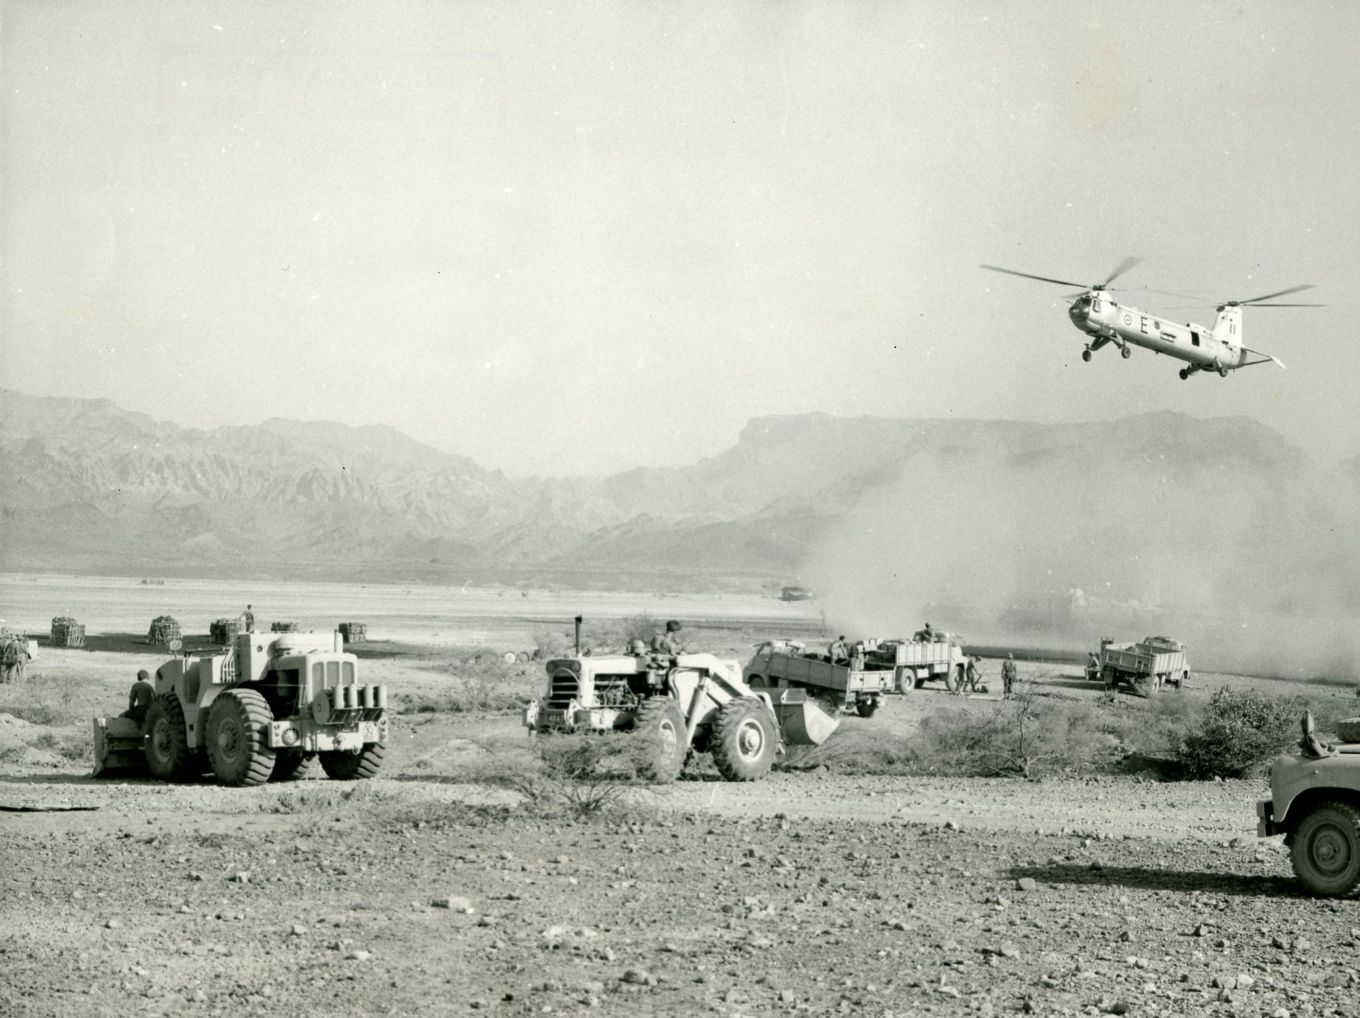 Historical image showing the Airfield Construction Branch in action in the Middle East during the 1960’s